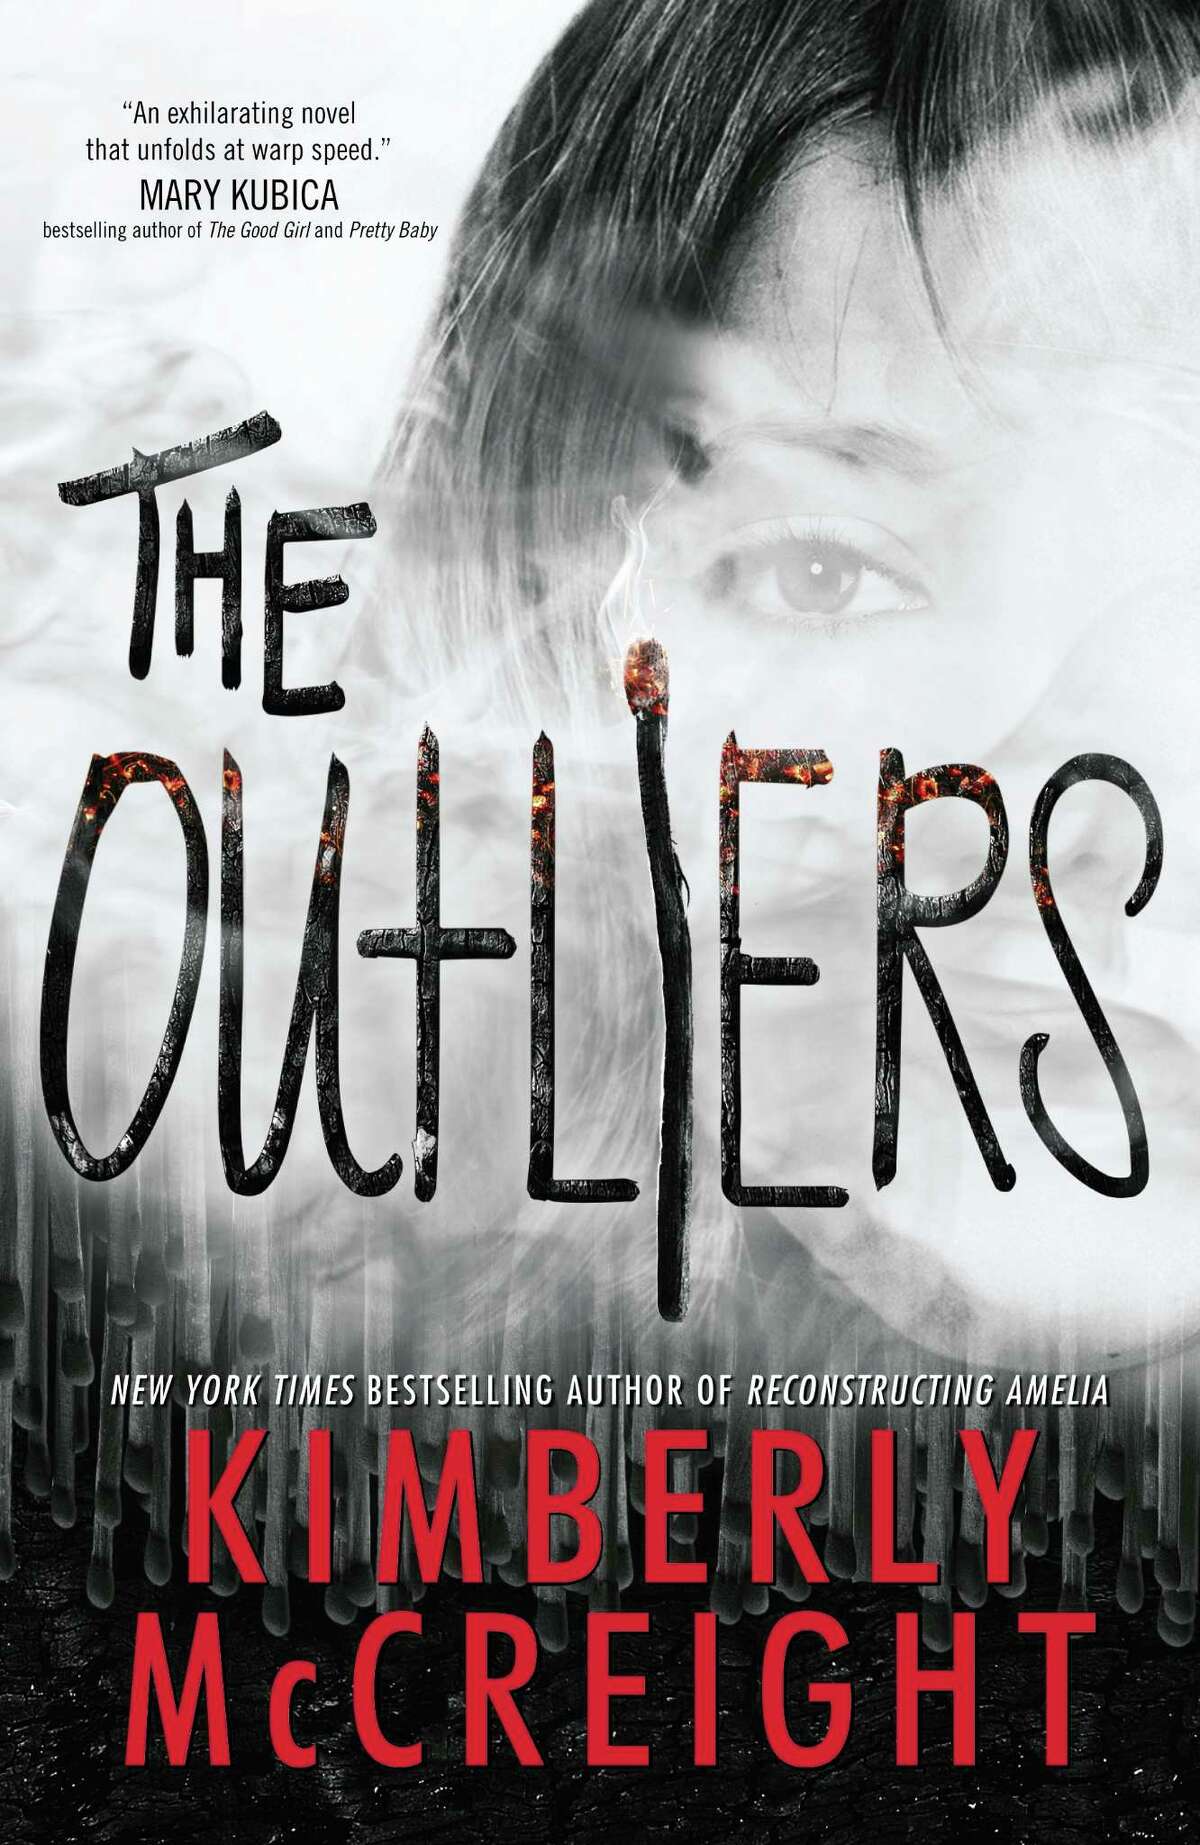 This book cover image released by HarperCollins shows "The Outliers," by Kimberly McCreight. (HarperCollins via AP)